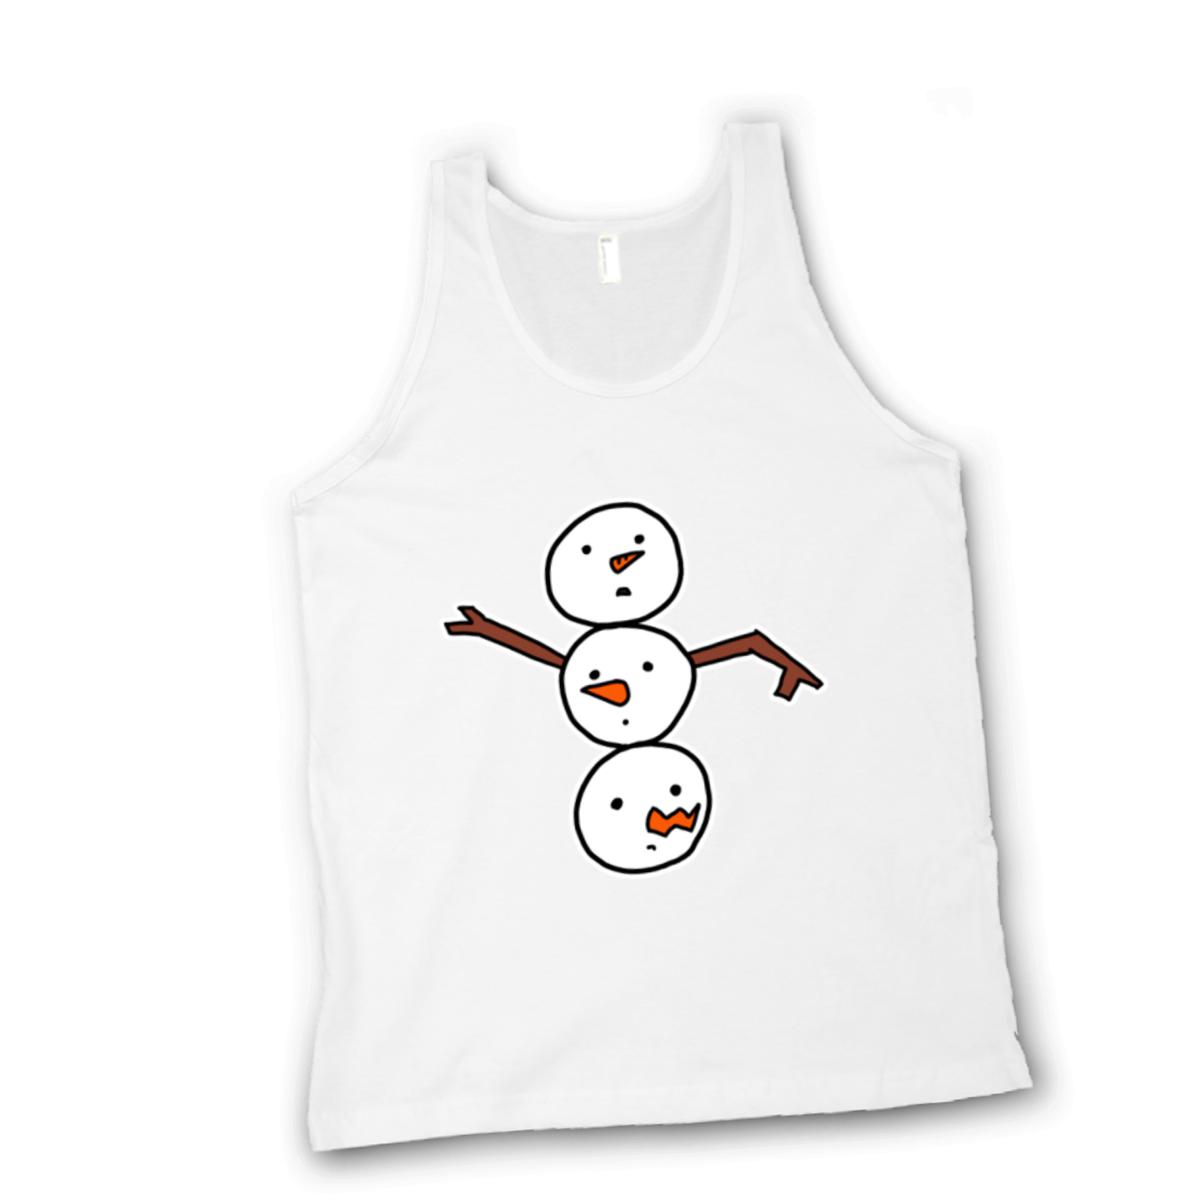 Snowman All Heads Unisex Tank Top Extra Large white